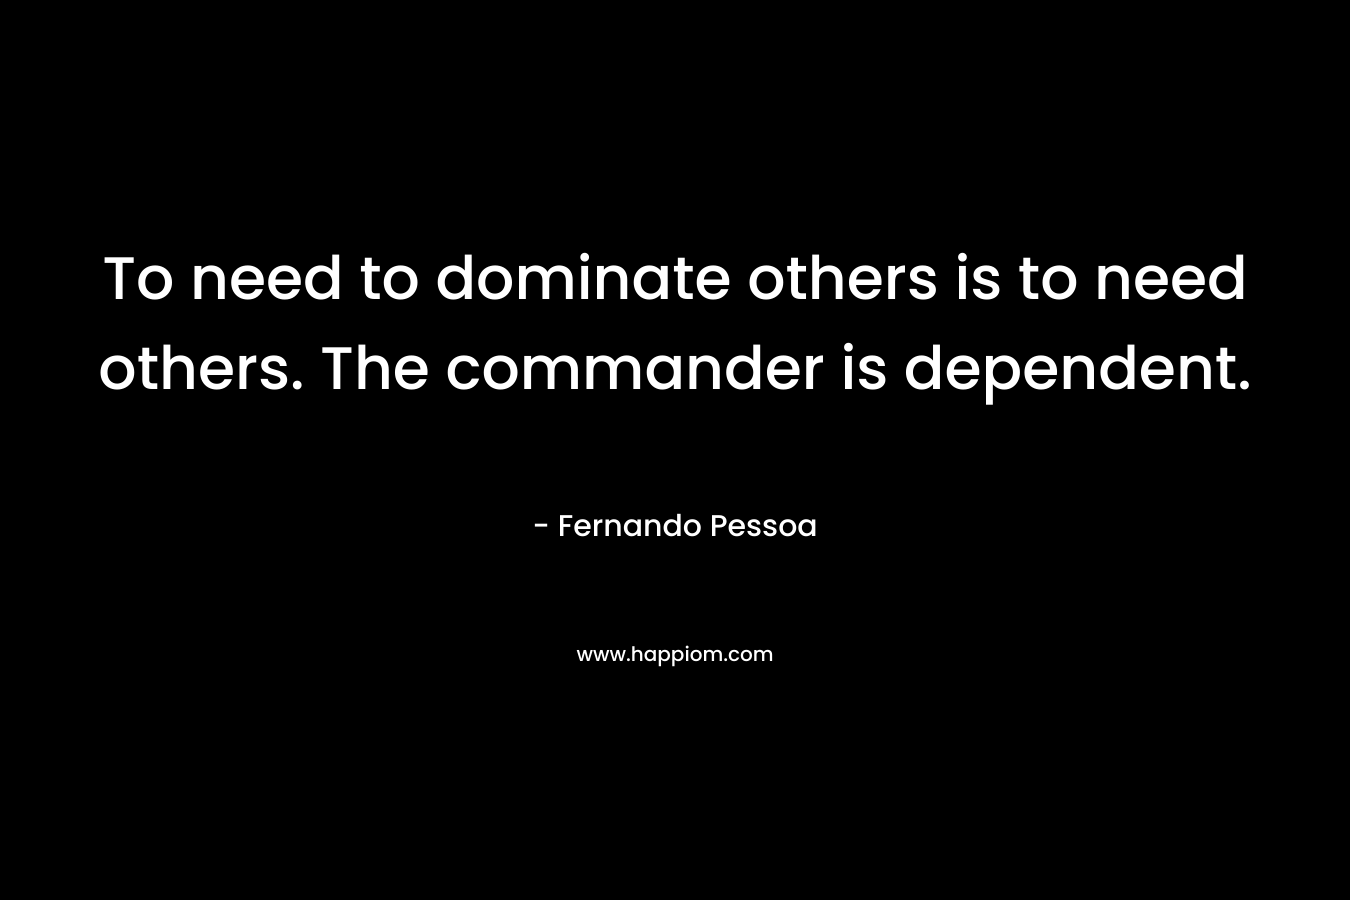 To need to dominate others is to need others. The commander is dependent. – Fernando Pessoa